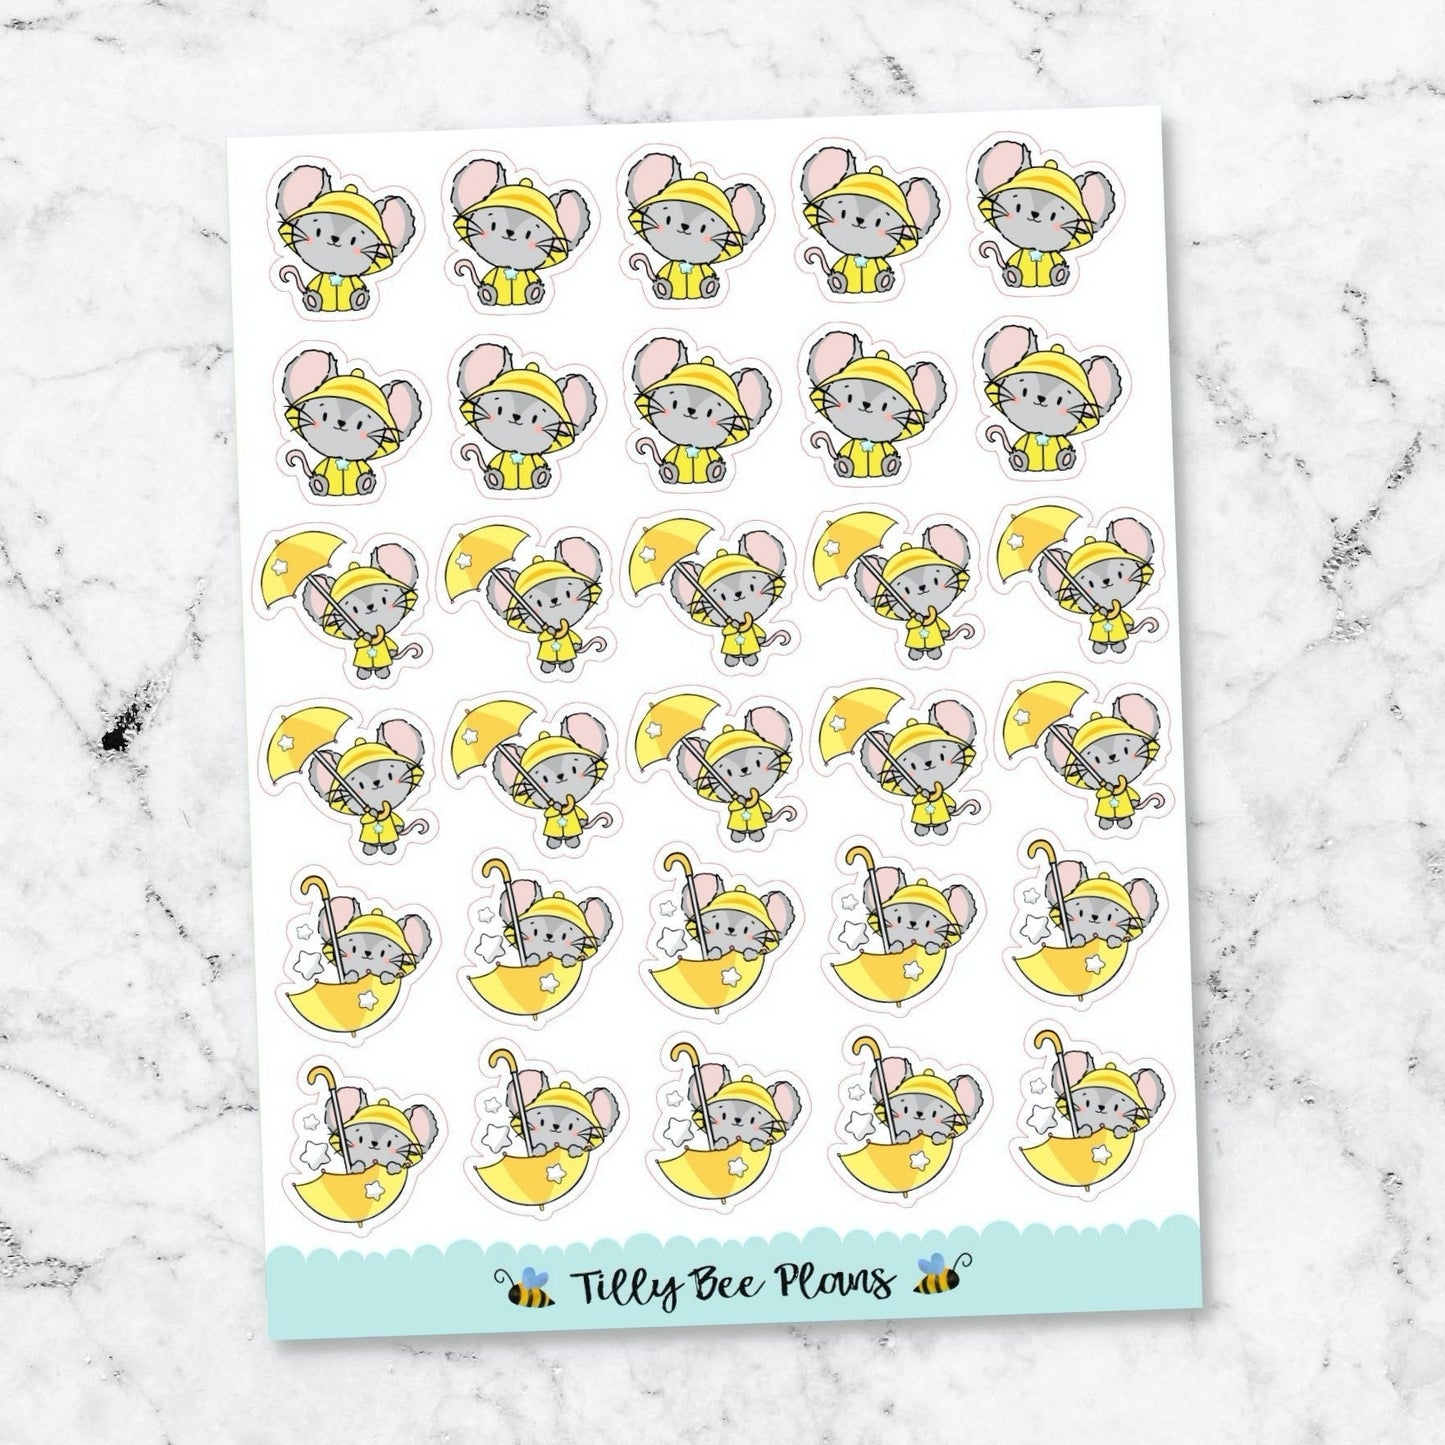 Rainy Mouse Character Stickers